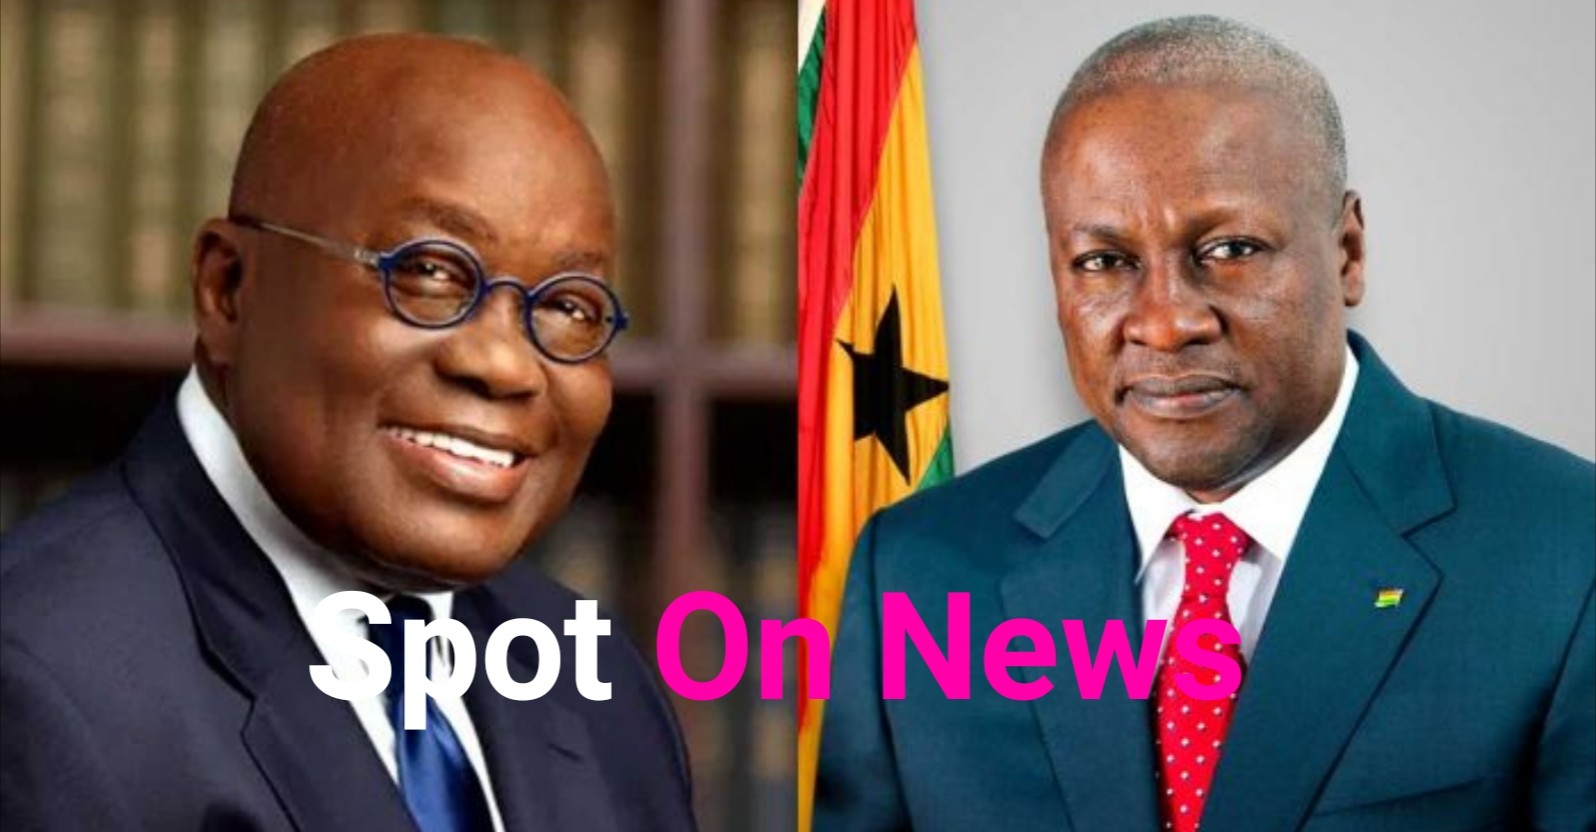 NDC injects the NPP delivery tracker with failed promises tracker to heat up the minds of voters against the 2020 elections